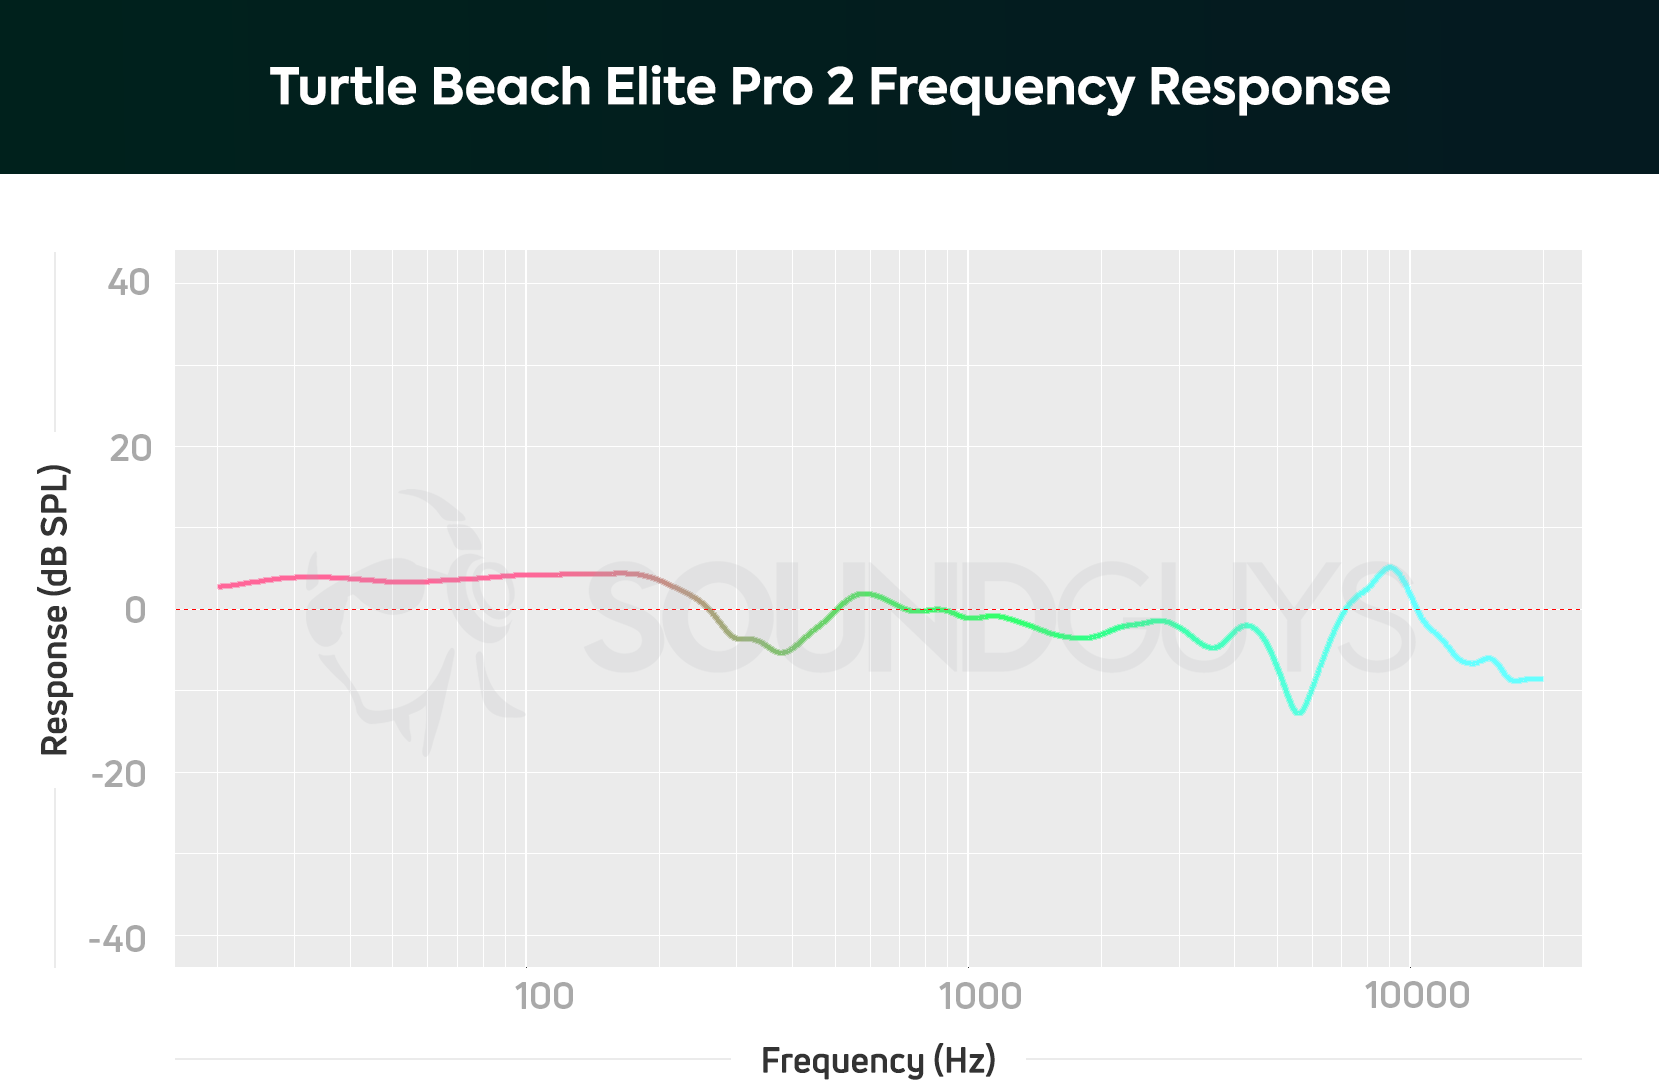 A frequency response chart for The Turtle Beach Elite Pro 2 gaming headset, which shows boosted bass